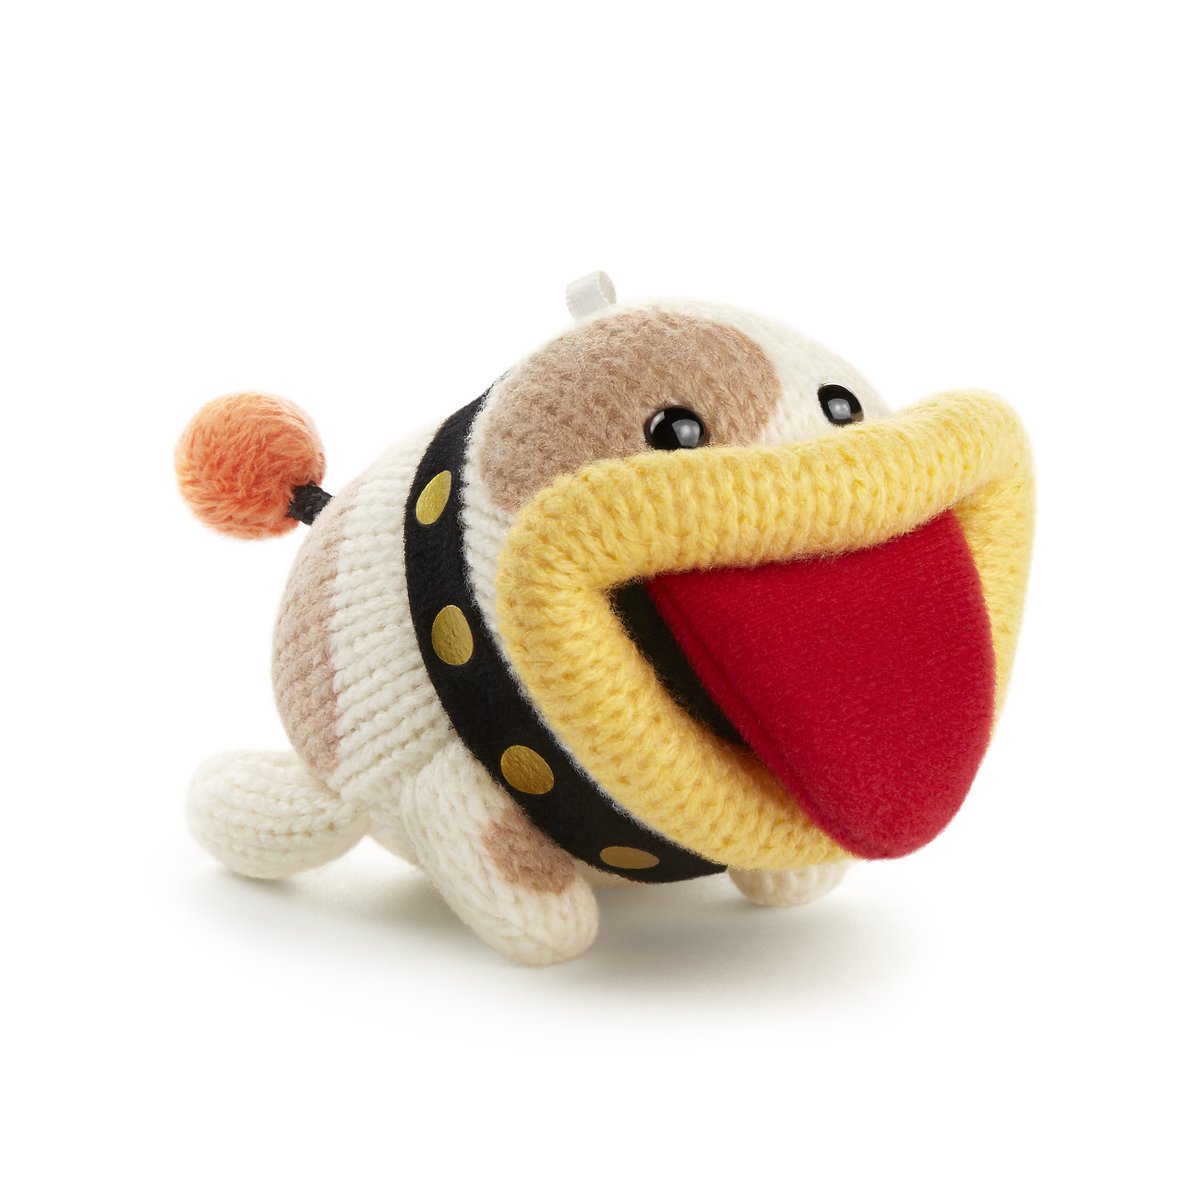 Poochy and Yoshi's Woolly World News